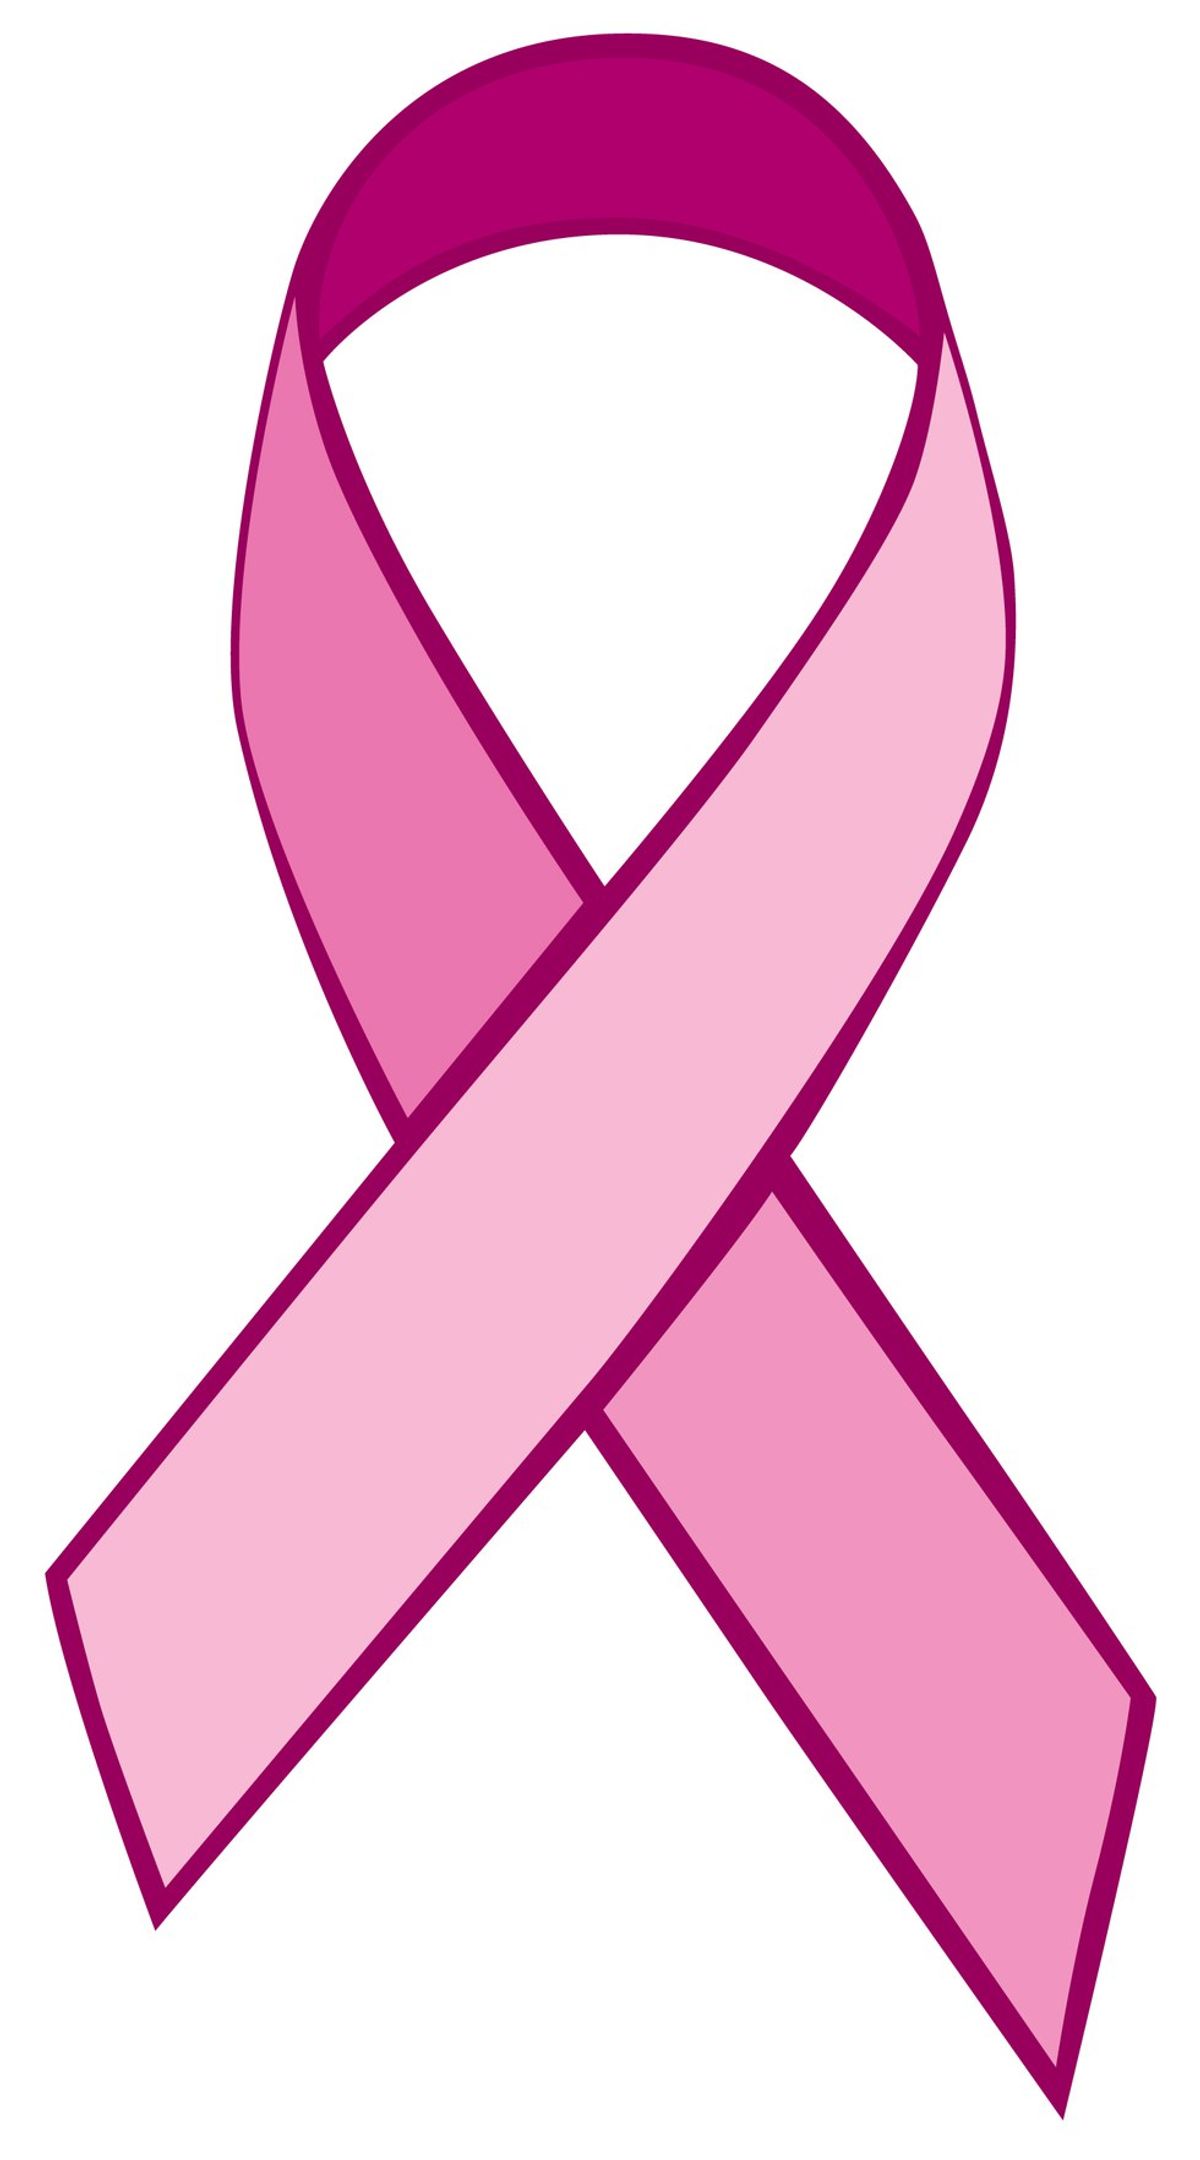 It's More Than Just A Pink Ribbon